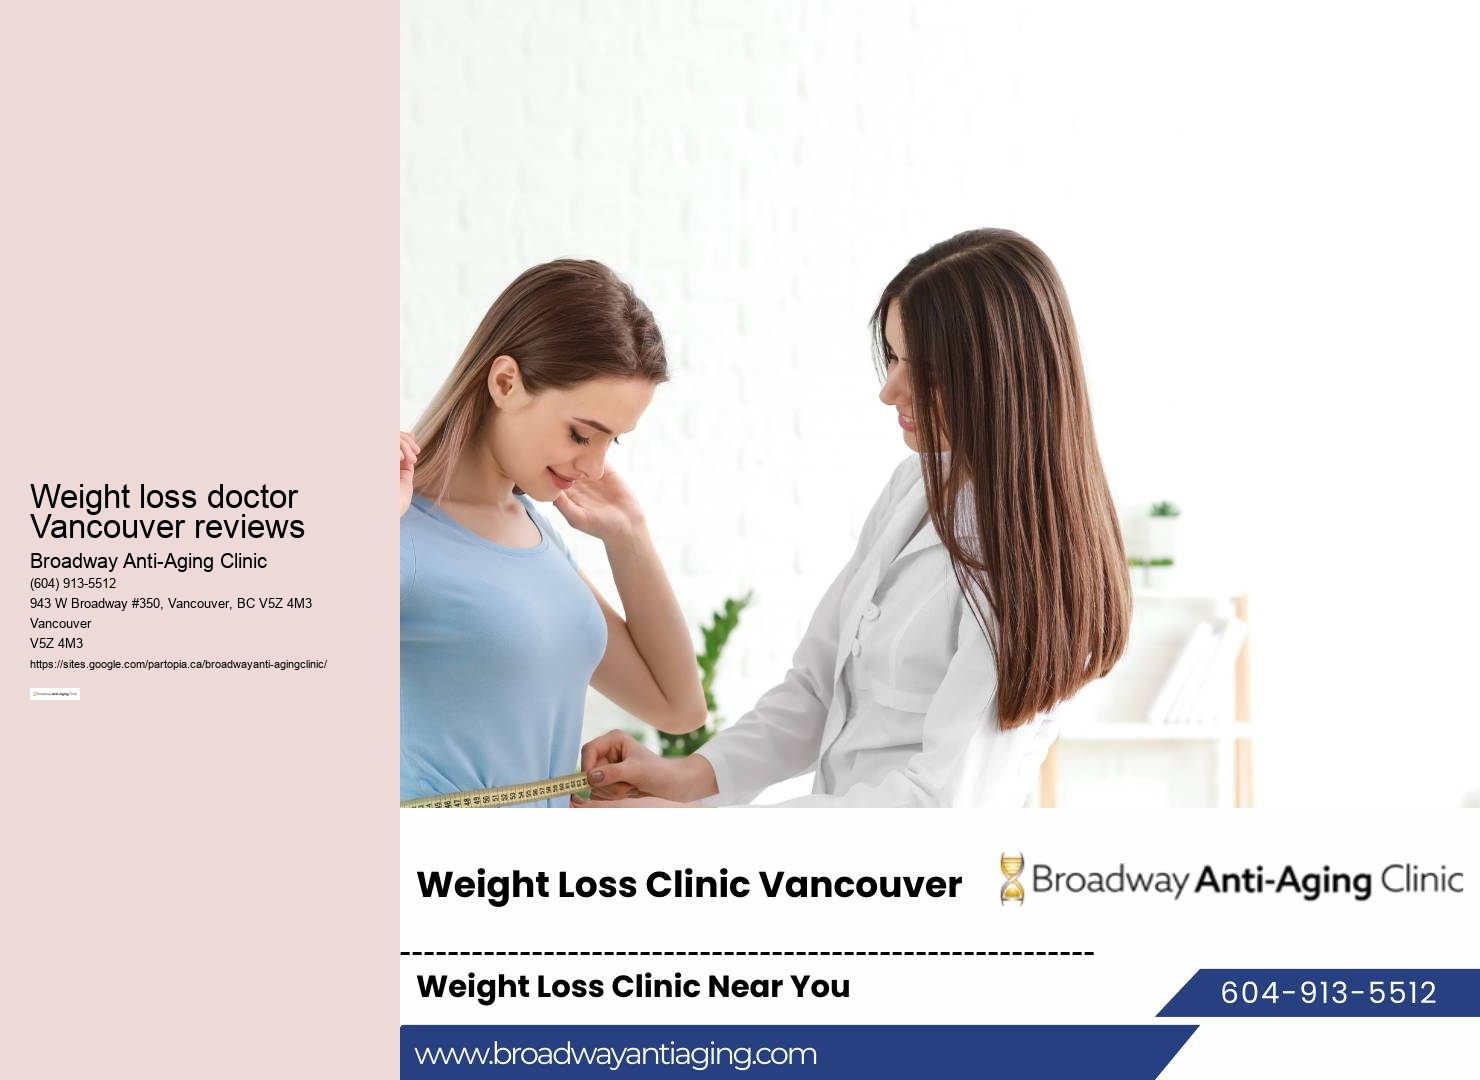 Weight loss doctor Vancouver reviews